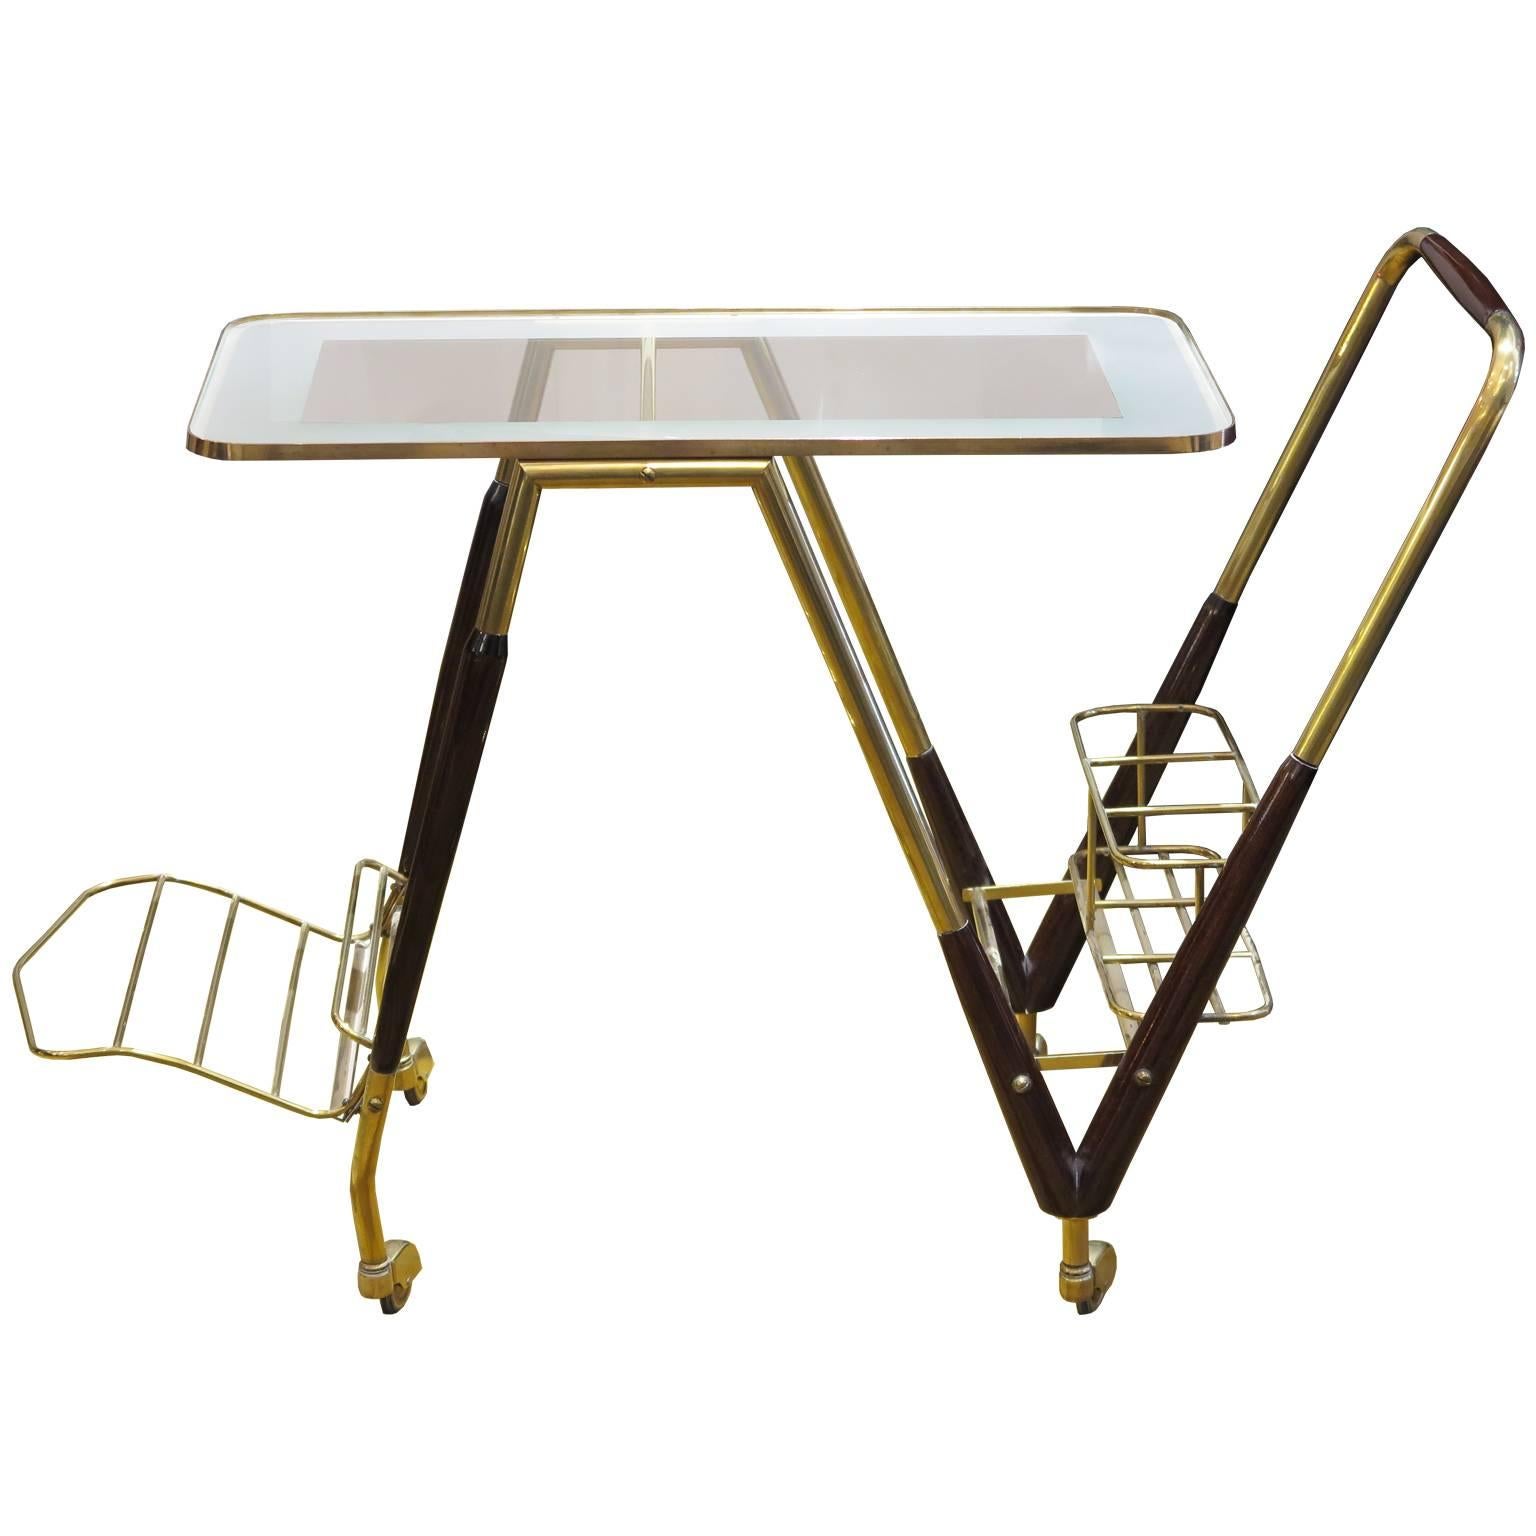 Italian midcentury bar cart on wheels in brass with mahogany details. Frosted and clear glass top with a brass rim. Bottle holder and magazine rack in brass attached to frame.